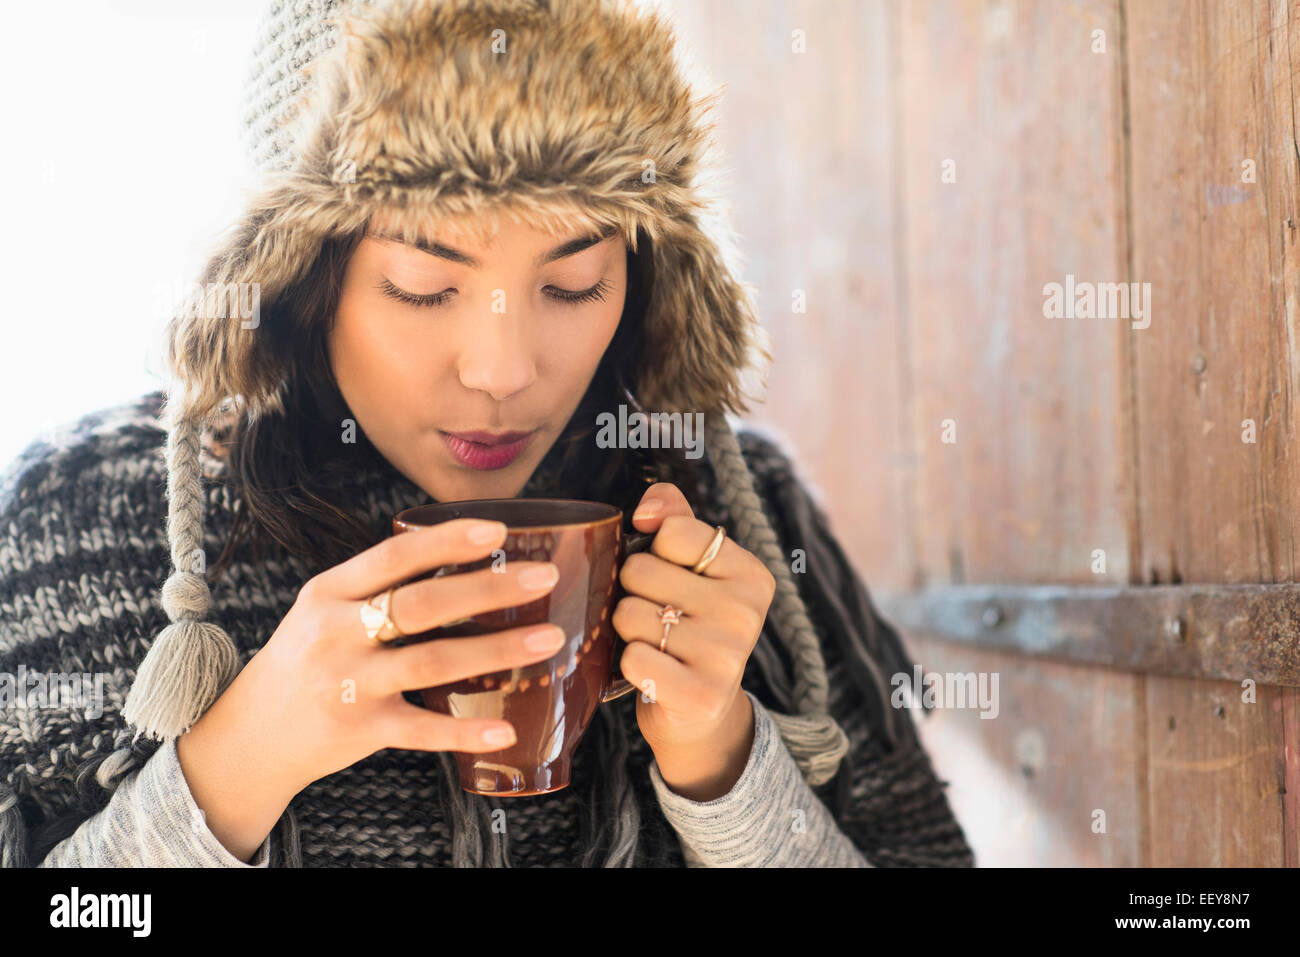 Portrait of young woman wearing warm hat, blowing on cup of drink Stock Photo